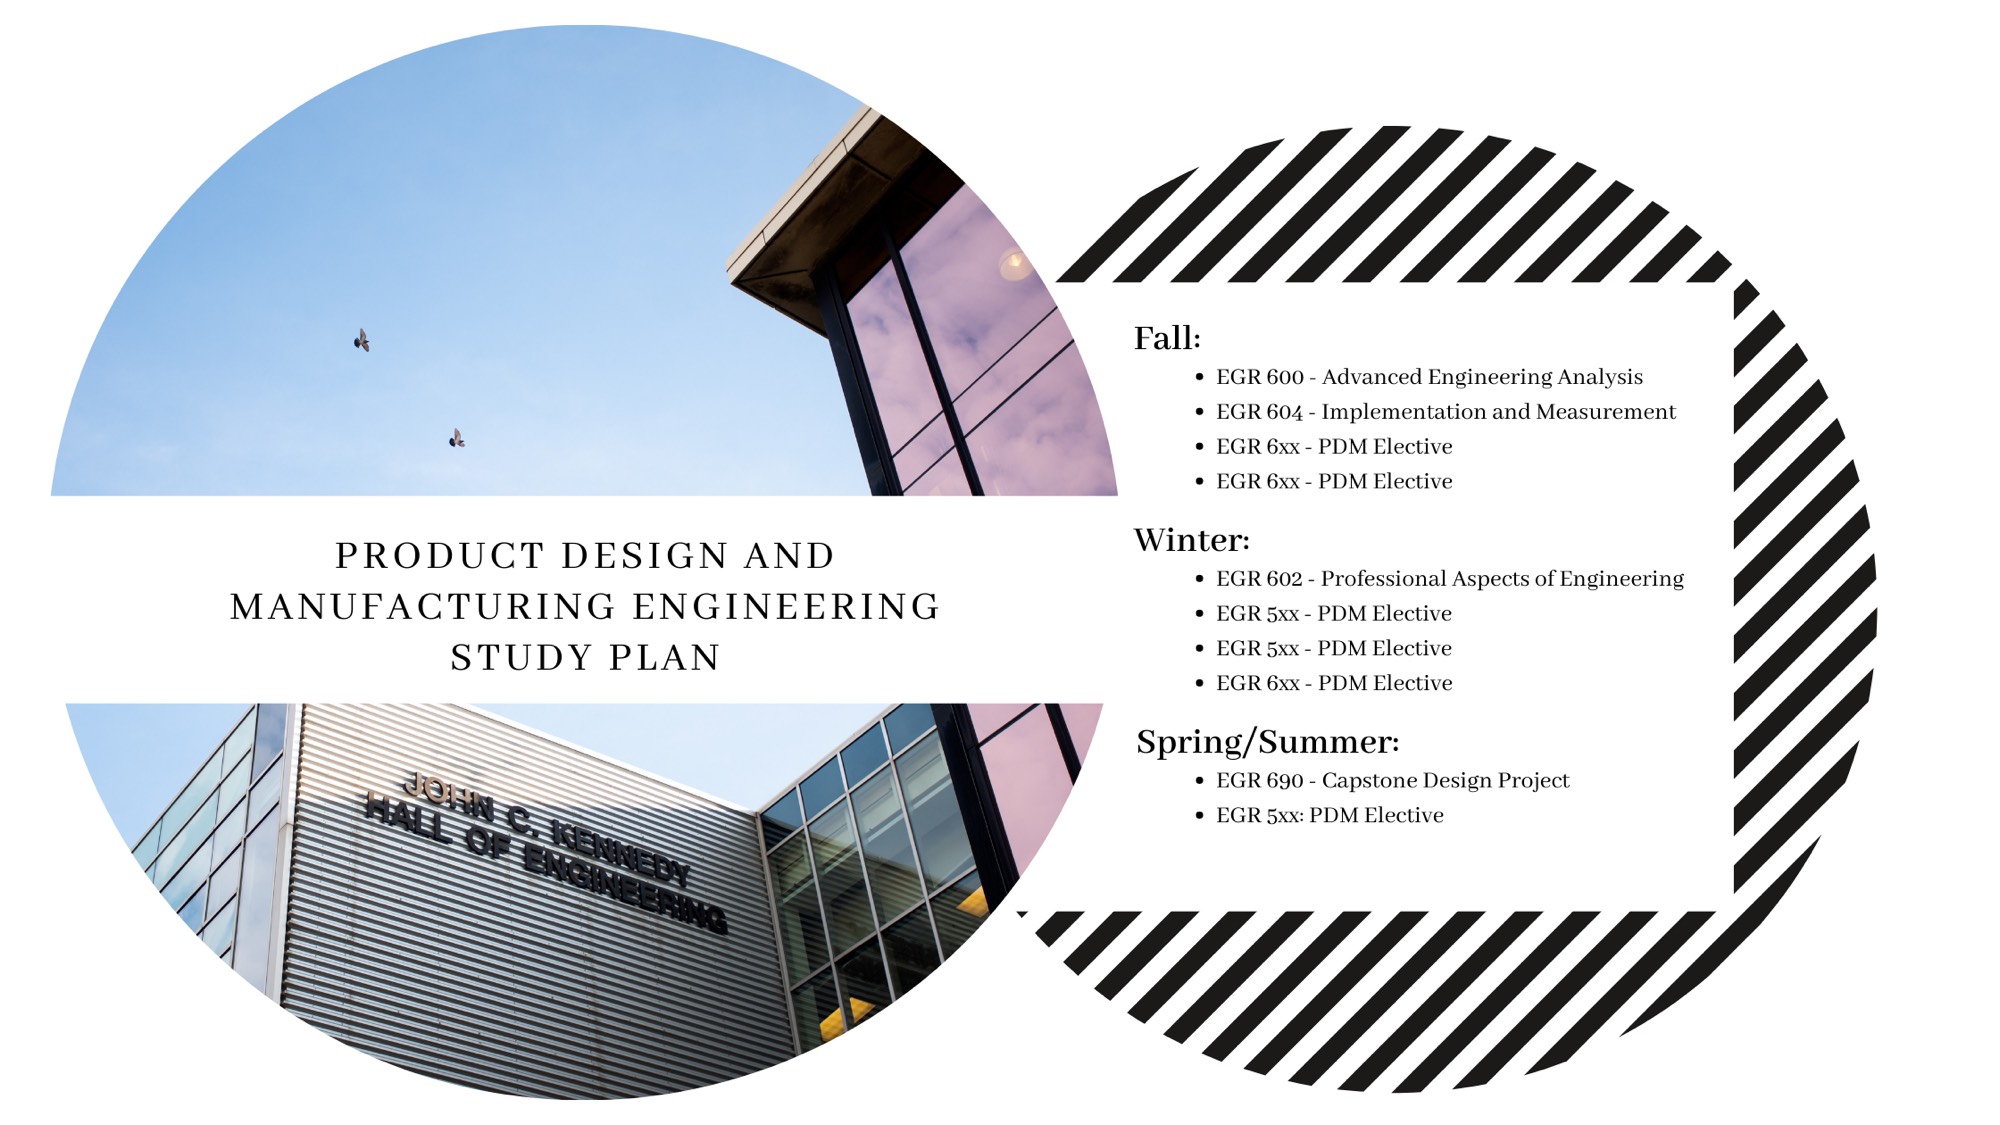 Product Design and Manufacturing Engineering Study Plan